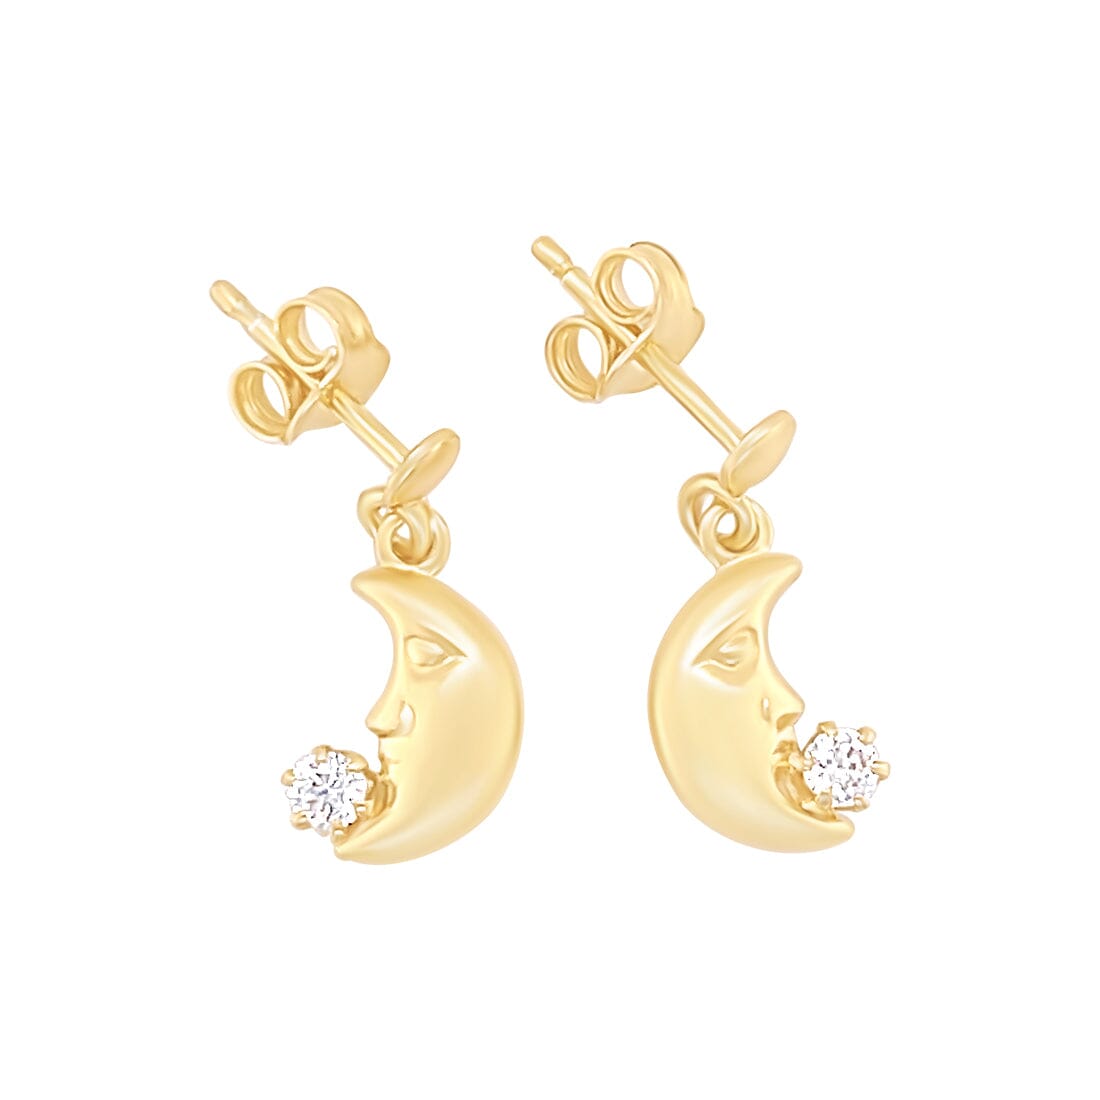 Children's Moon Drop Earrings with Cubic Zirconia Stud in 9ct Yellow Gold Silver Infused Earrings Bevilles 